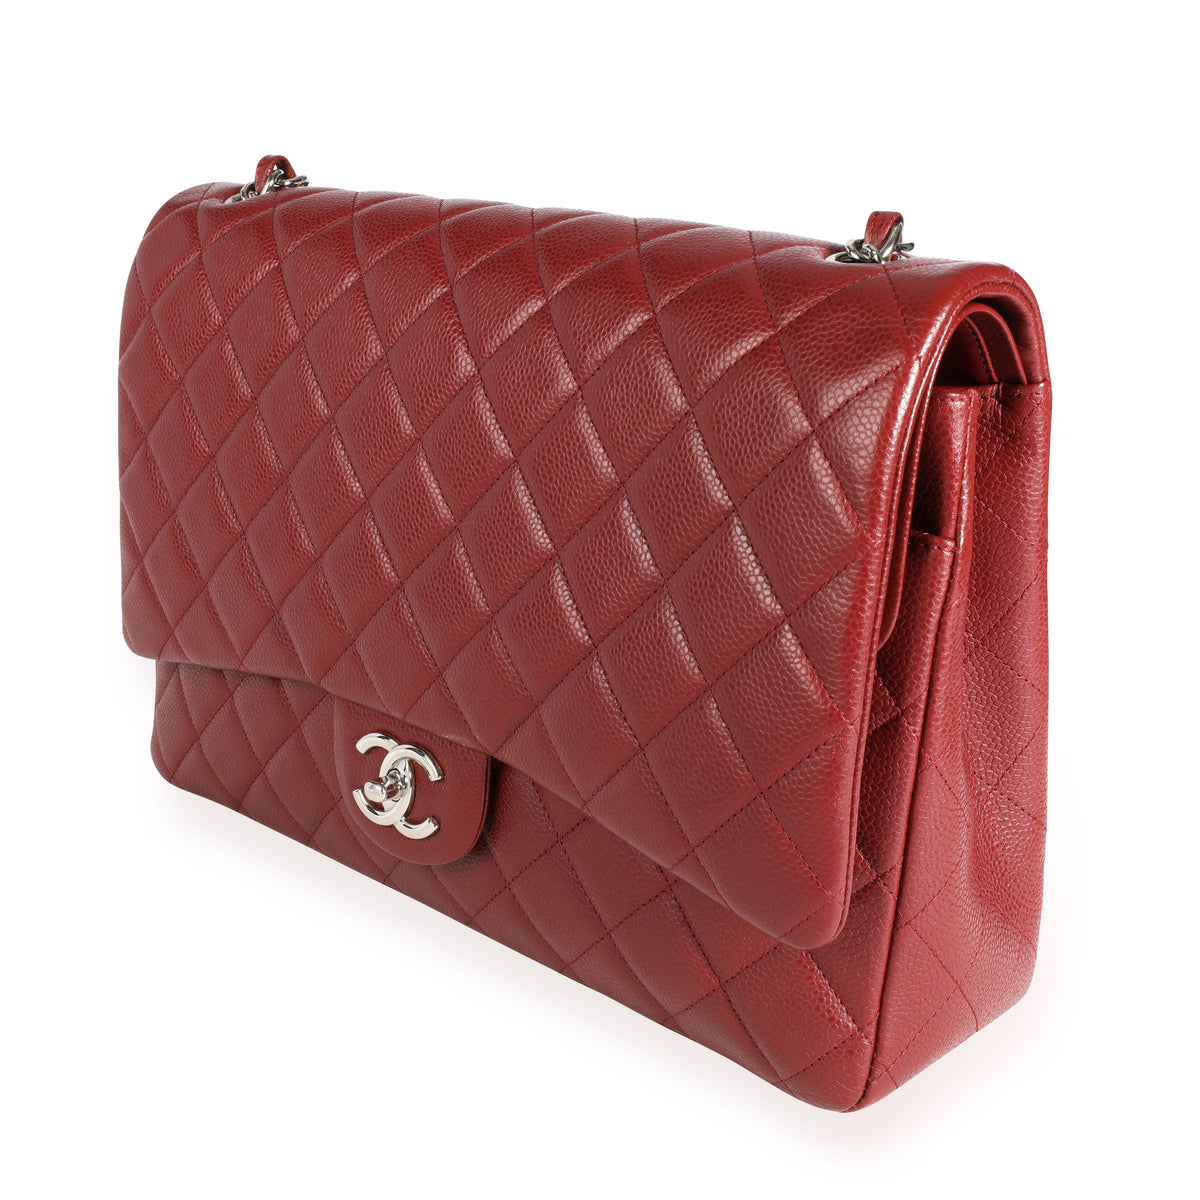 Chanel Burgundy Quilted Caviar Maxi Classic Double Flap Bag, myGemma